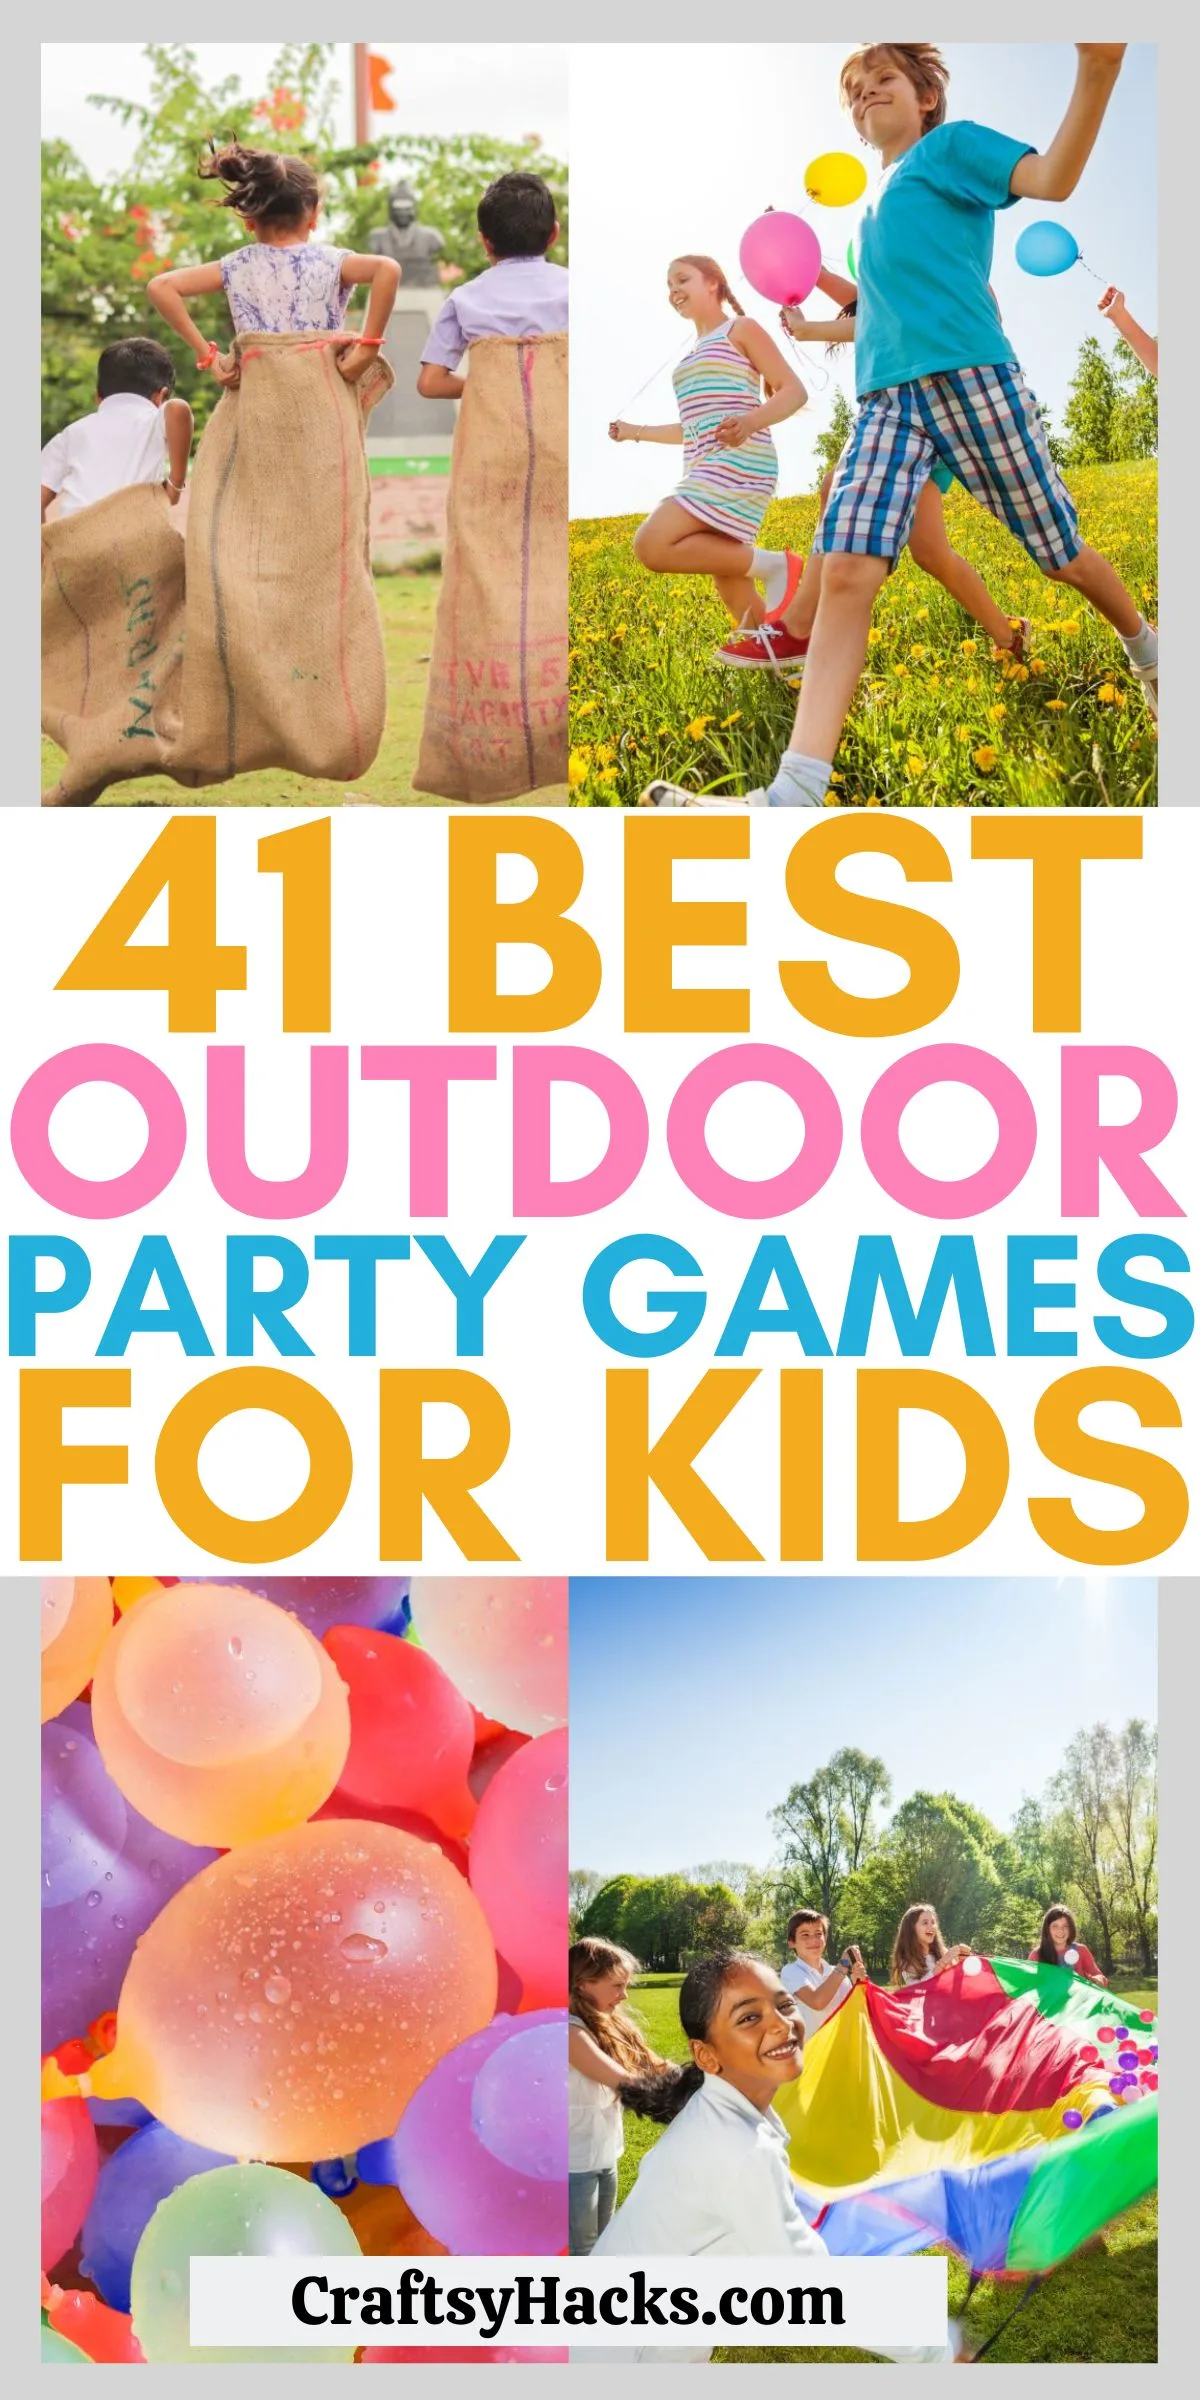 22 kids' party games ideas for indoor and outdoor parties